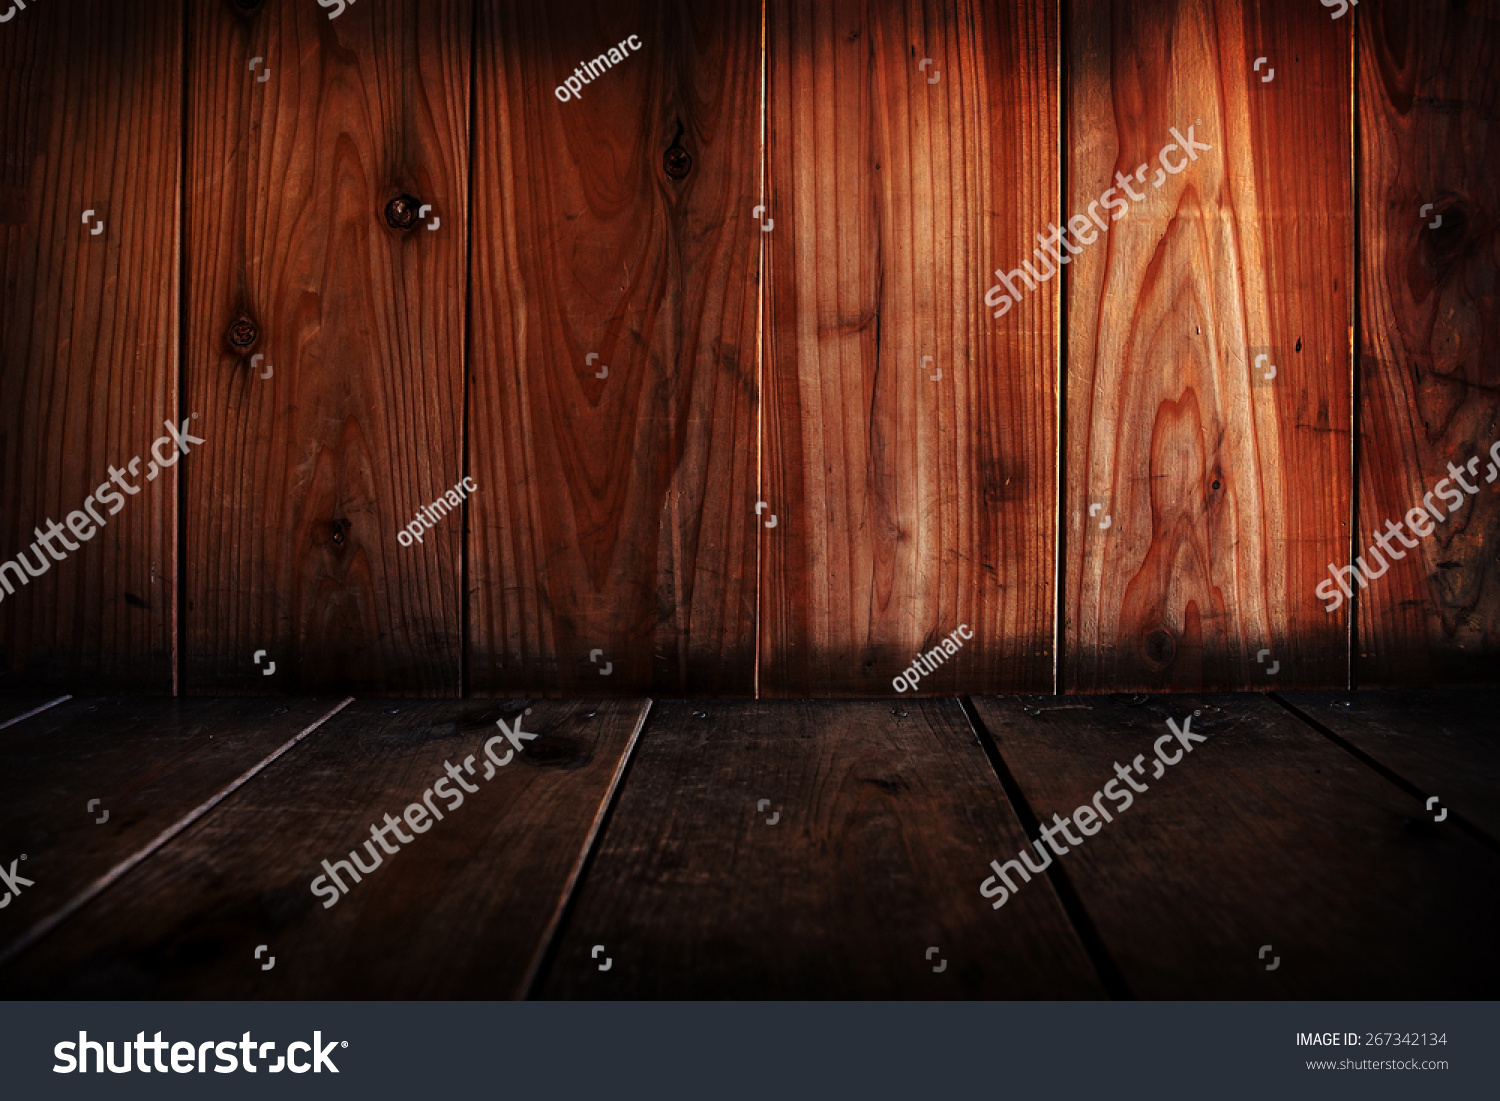 Wooden wall and floor abstract. Focus is on wall. #267342134